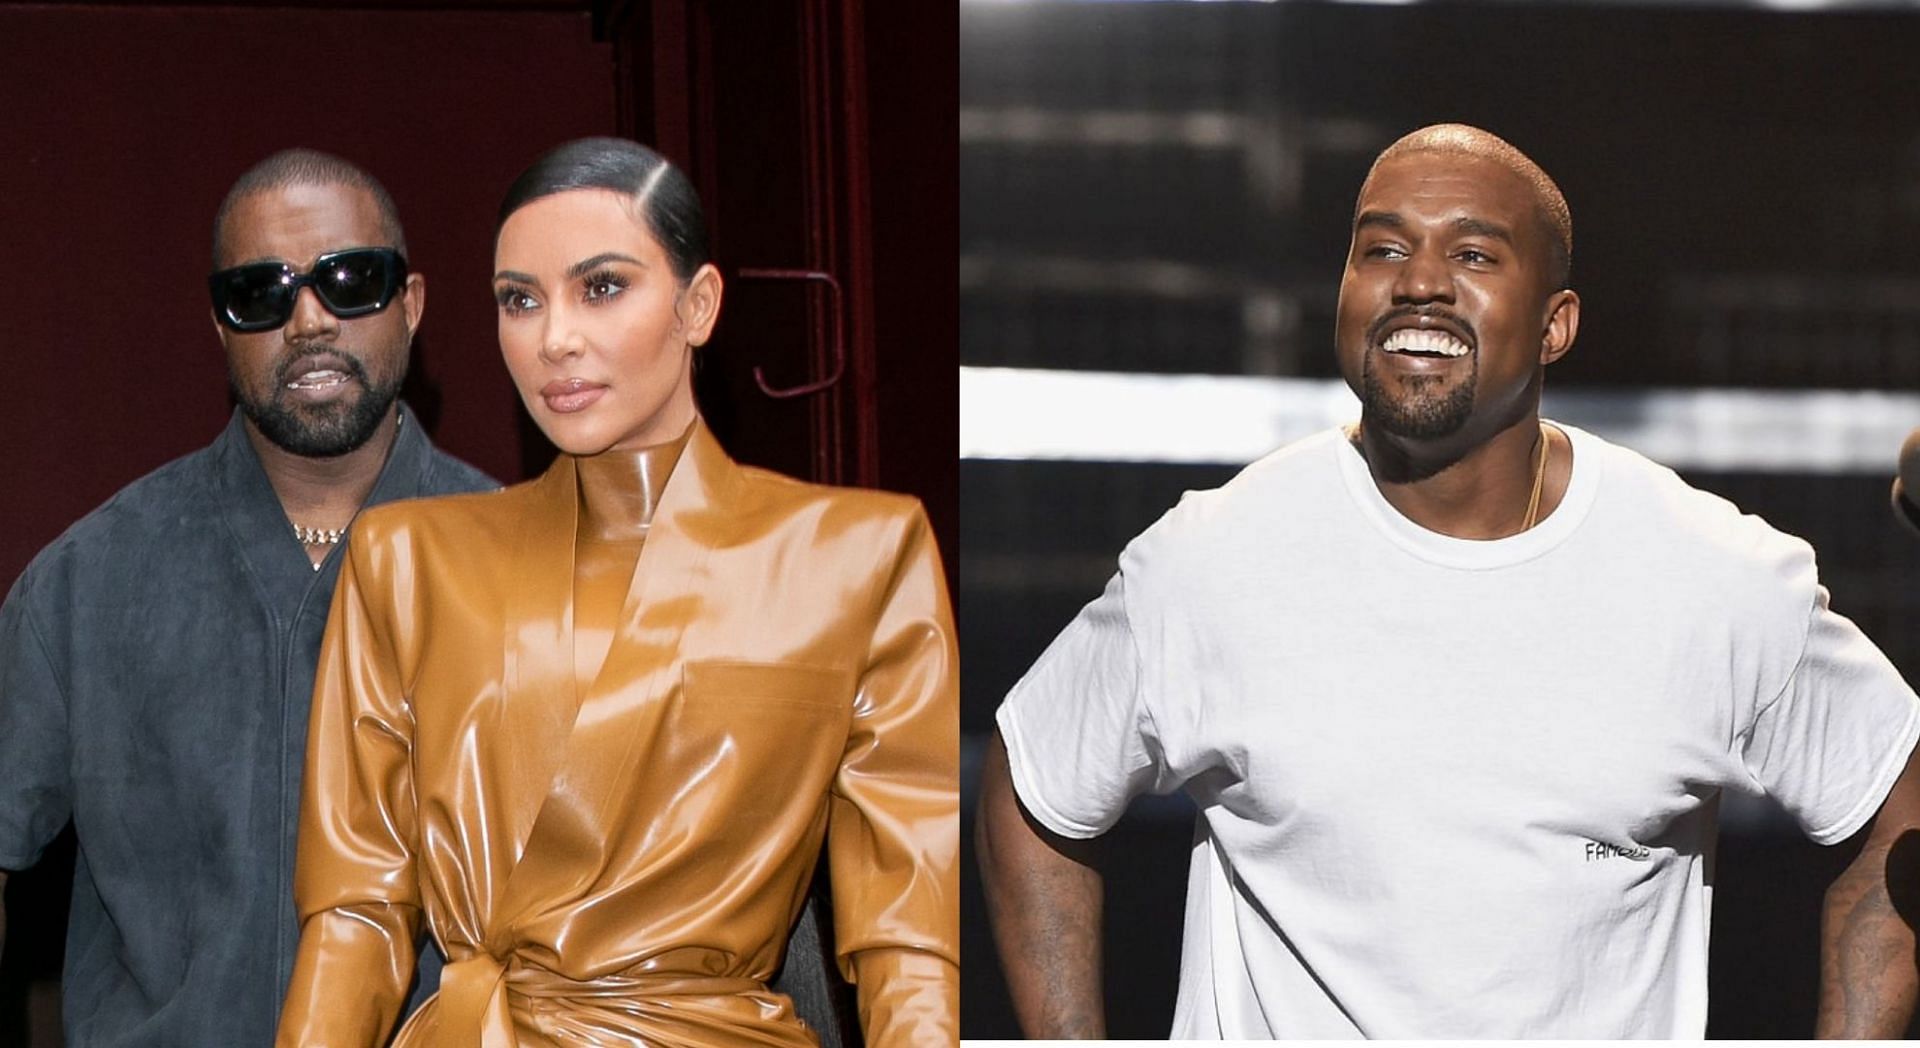 Kanye West recently claimed that he &quot;caught&quot; ex-wife Kim Kardashian with another man (Image via Getty Images)